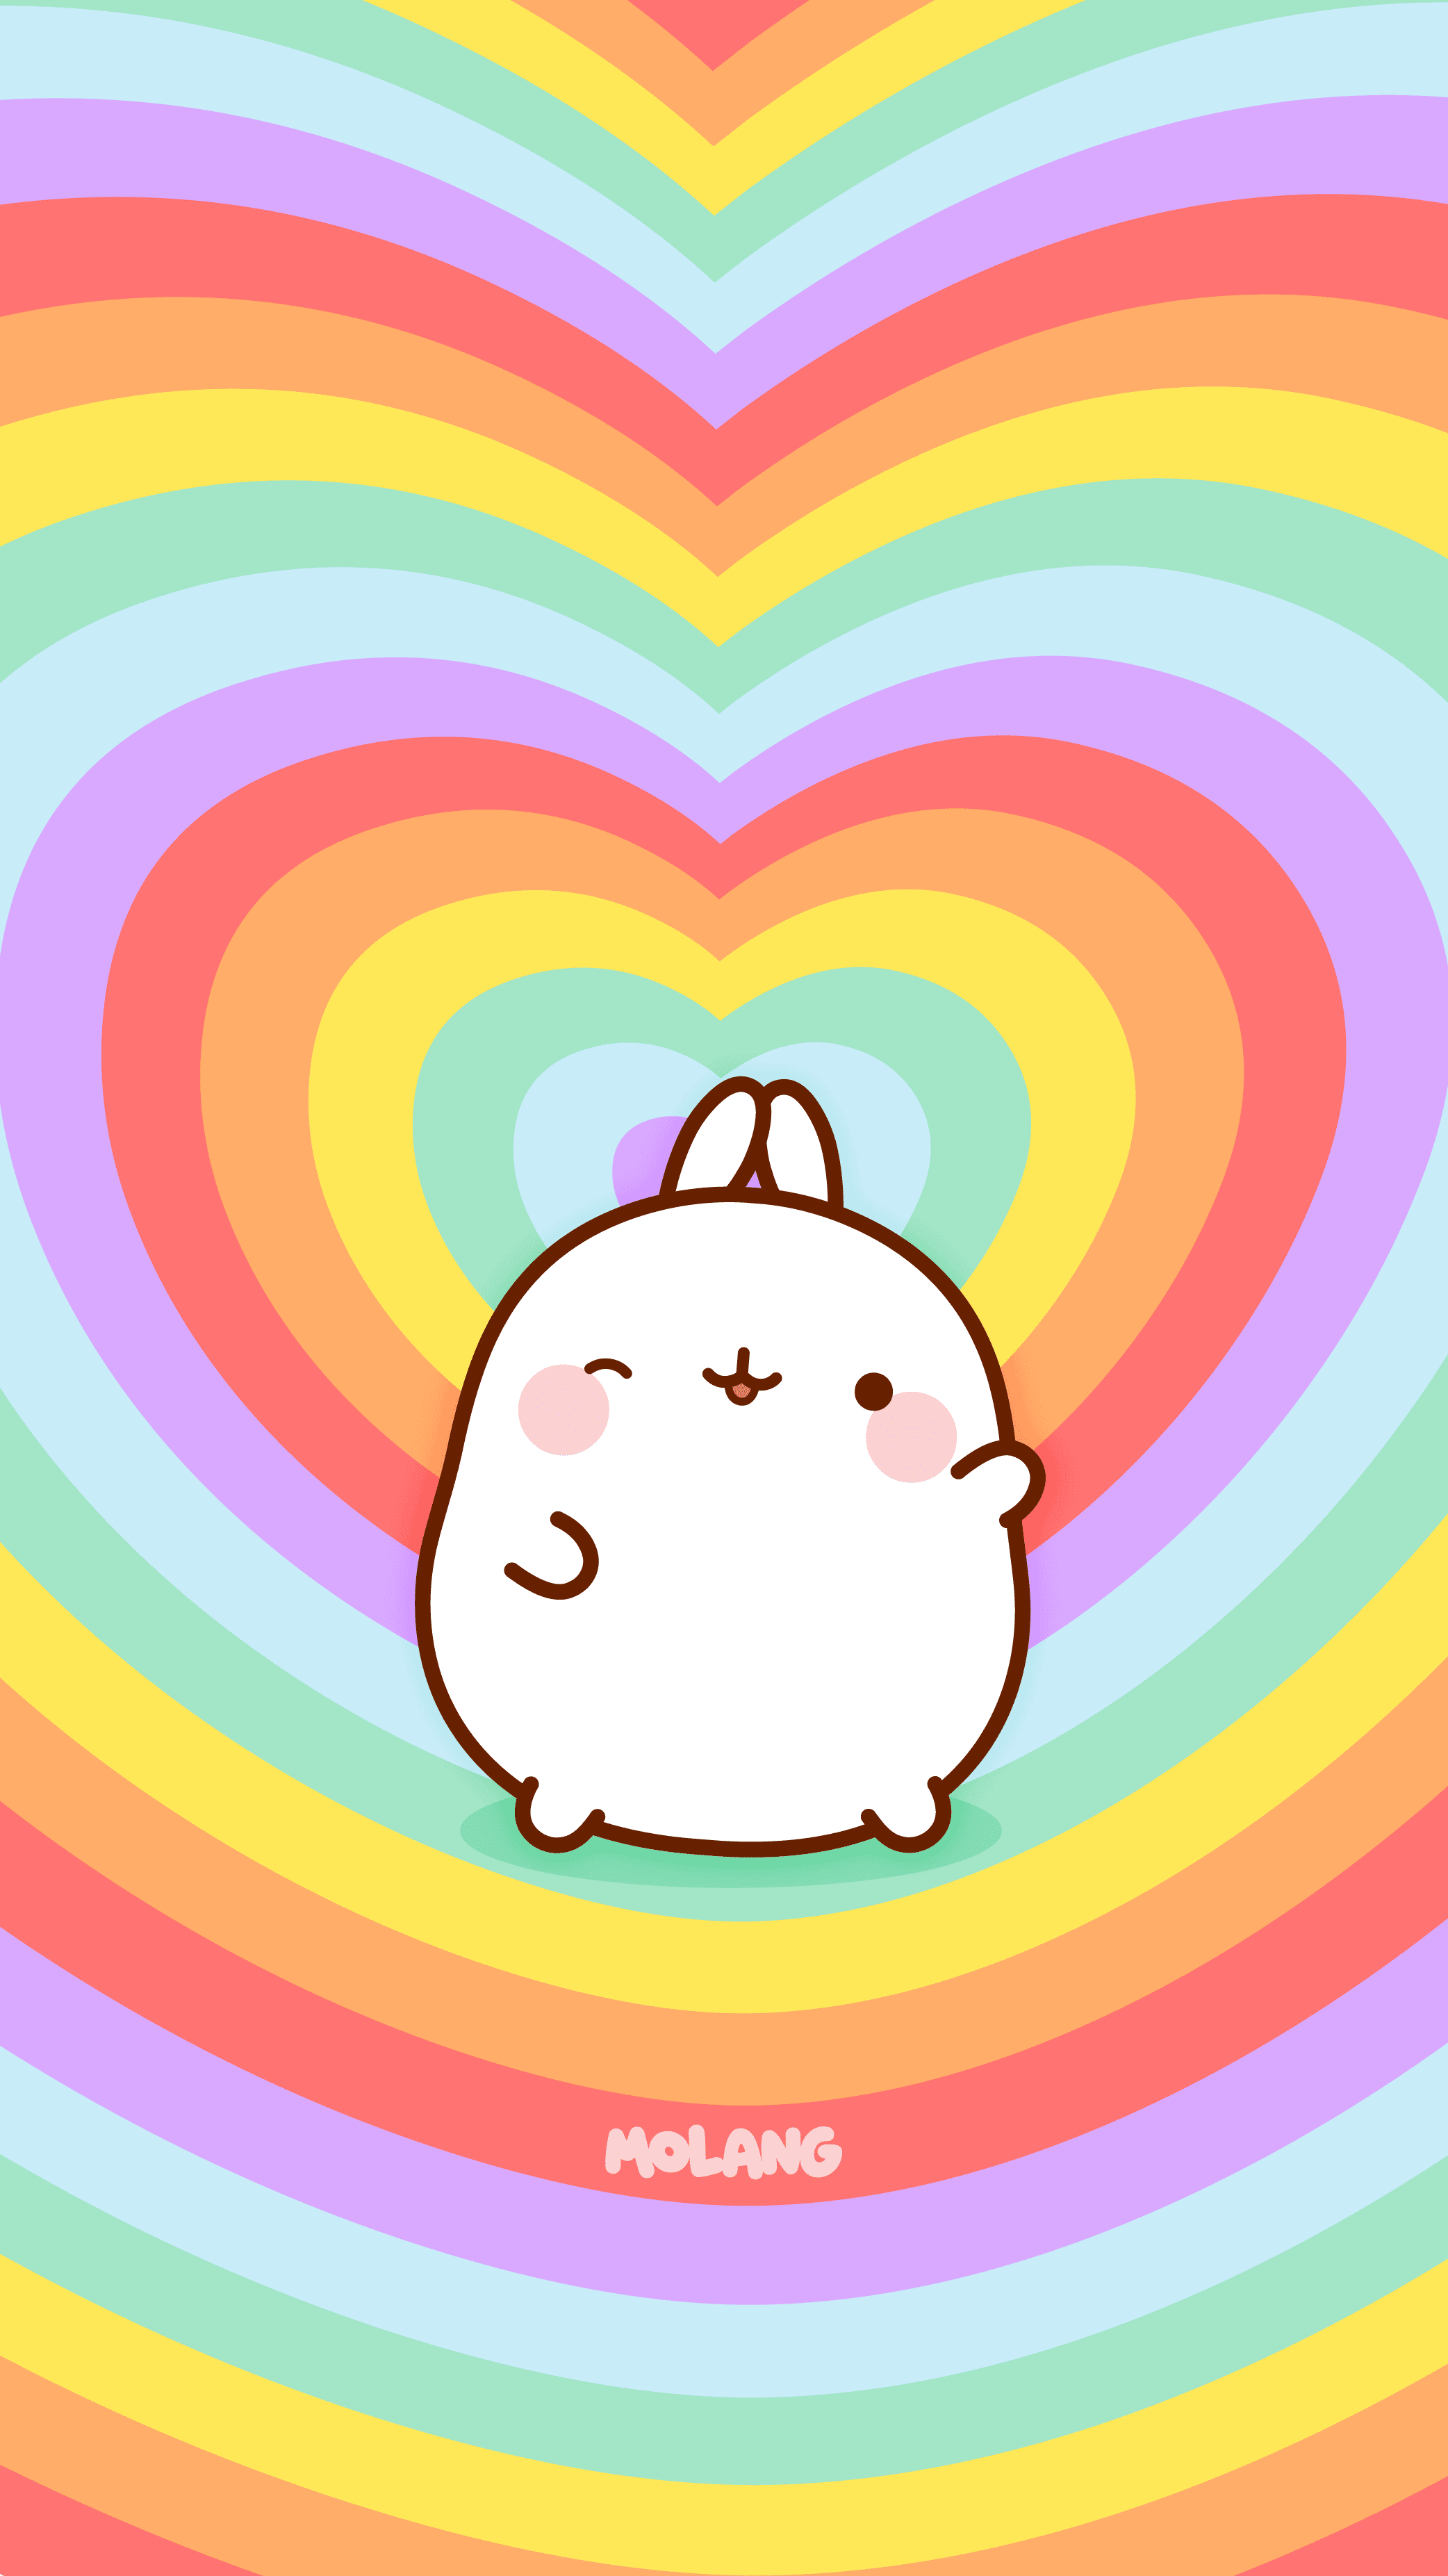 A cute white bunny is standing on top of rainbow colored hearts - Molang, colorful